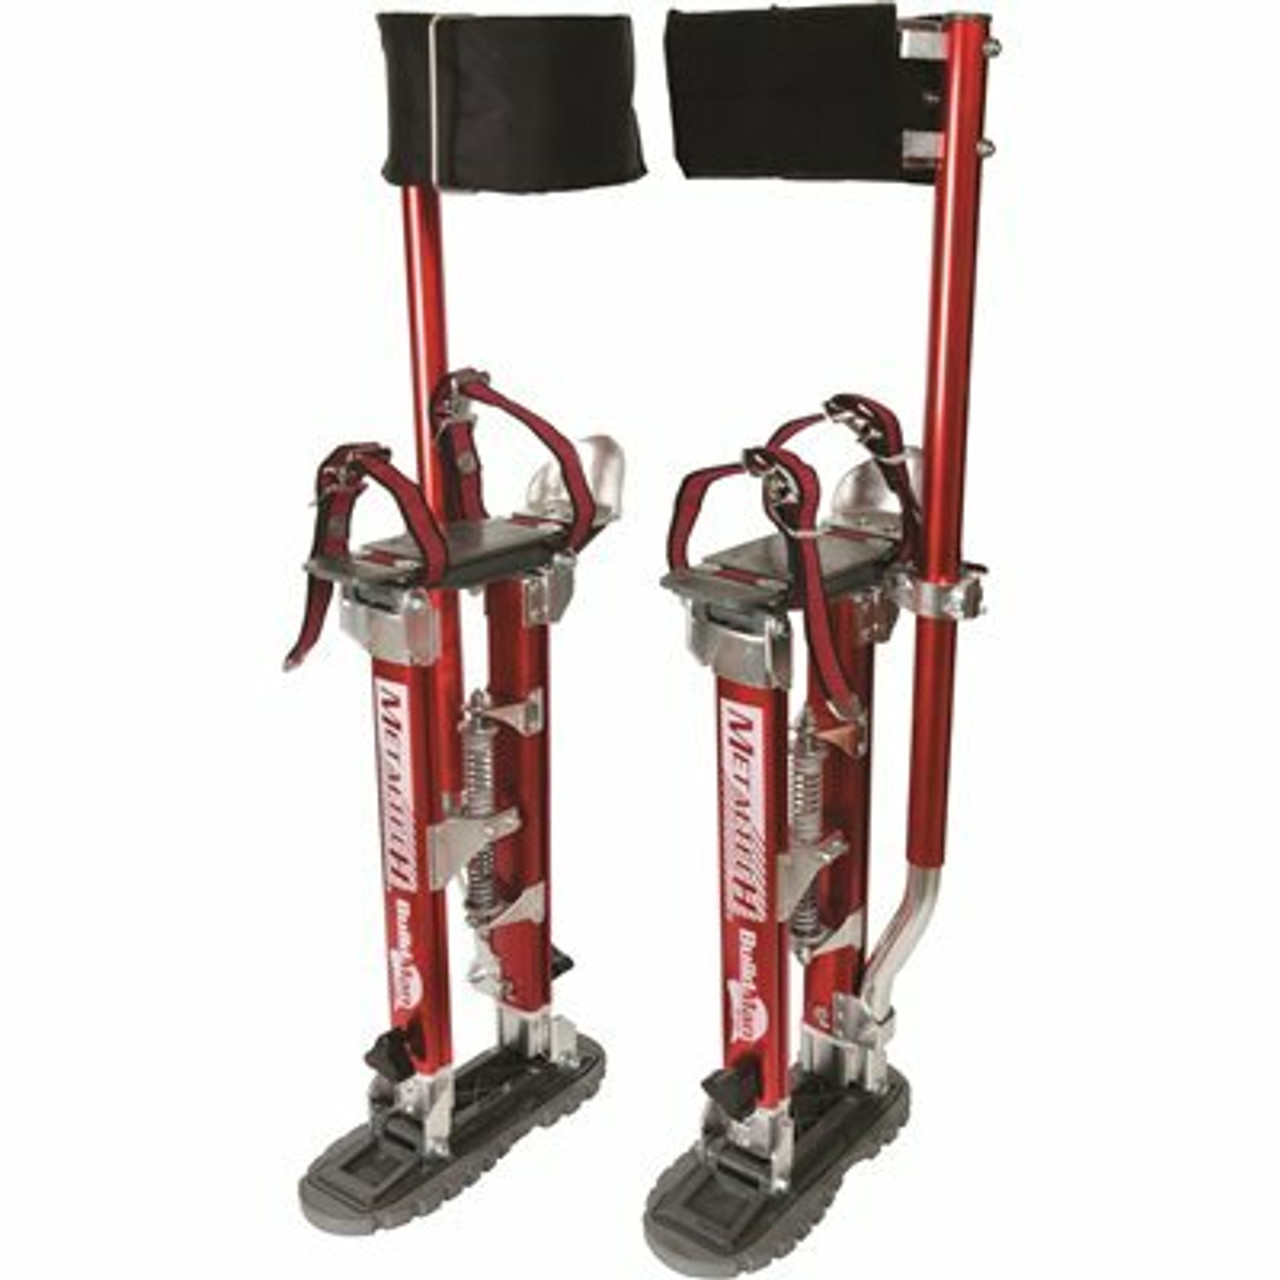 Buildman 18 In. To 30 In. Aluminum Adjustable Self-Locking Drywall Stilts With Anti-Fatigue Straps, 225 Lbs. Capacity